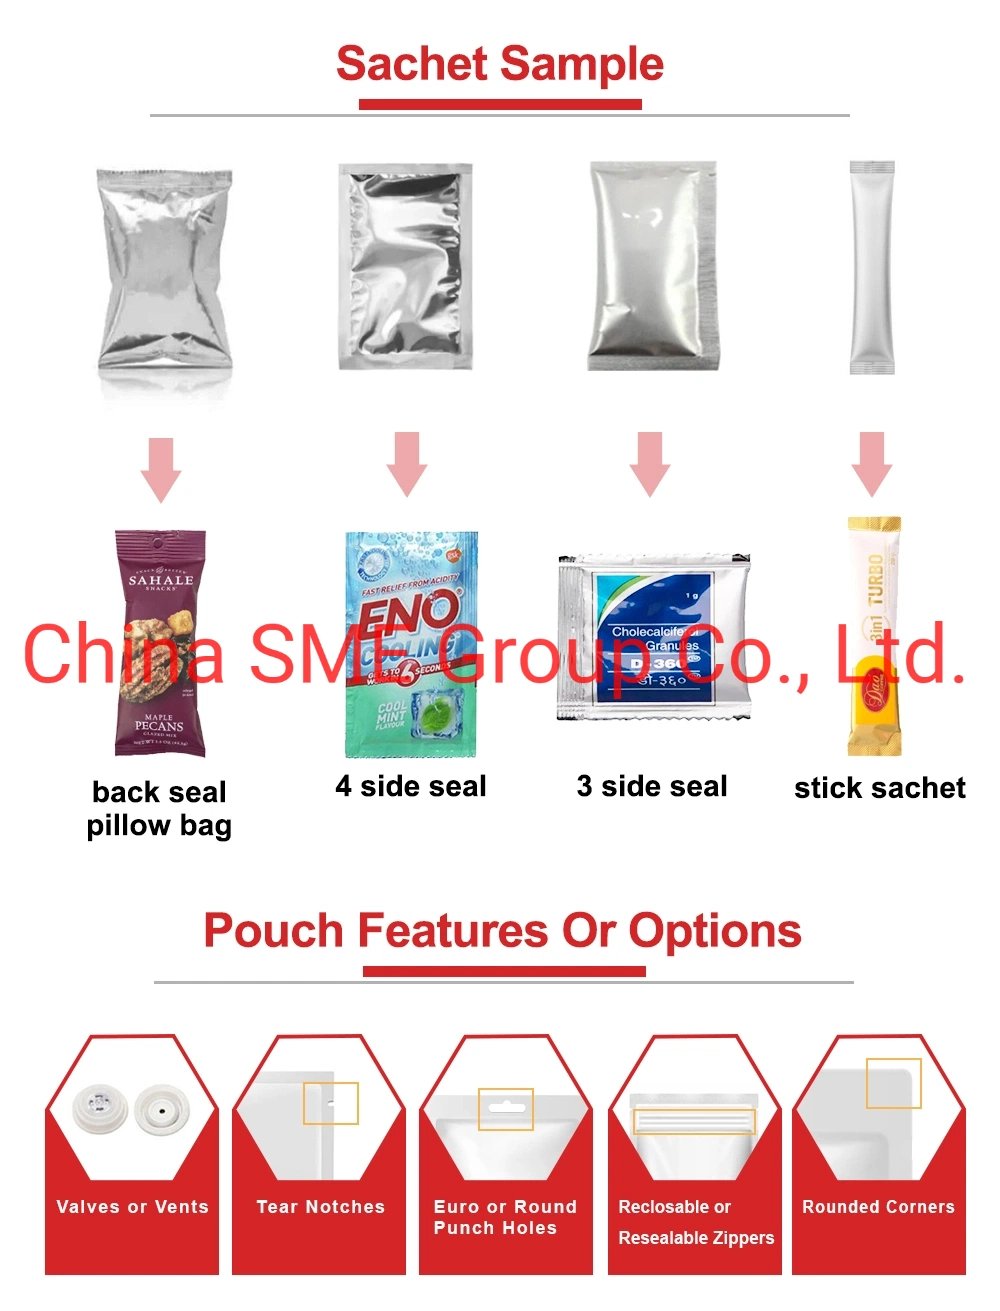 Fluorspar Powder Sericite Powder 4 CPA Hormon Powder Royal Jelly Powder Flour Weighing Filling Bagging Package Packaging Packing Machine Machinery Equipment